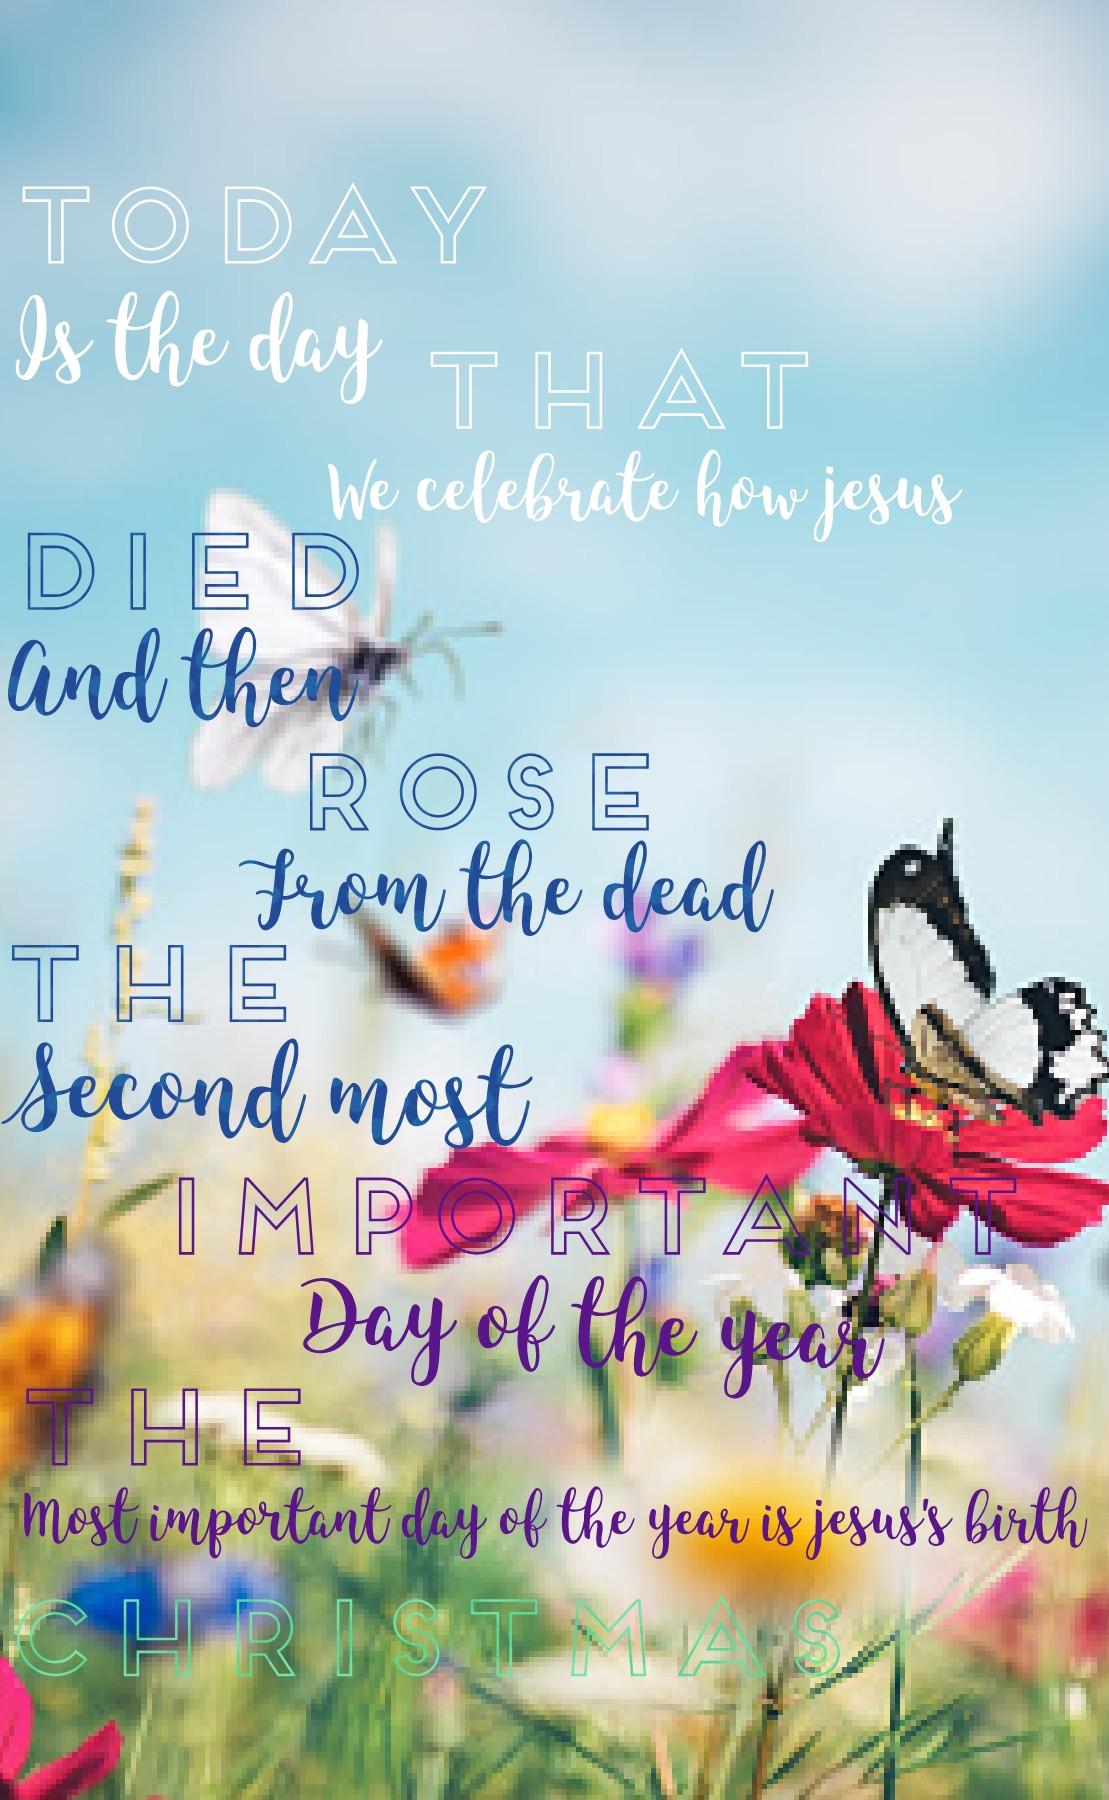 Tapp pls!!
Isn't this the best time of the year! Warm weather and beautiful flowers.. and a special holiday to celebrate!
If you want to learn more about Jesus and how he rose from the dead pls comment, I will tell you the whole story for you!! Have a gre